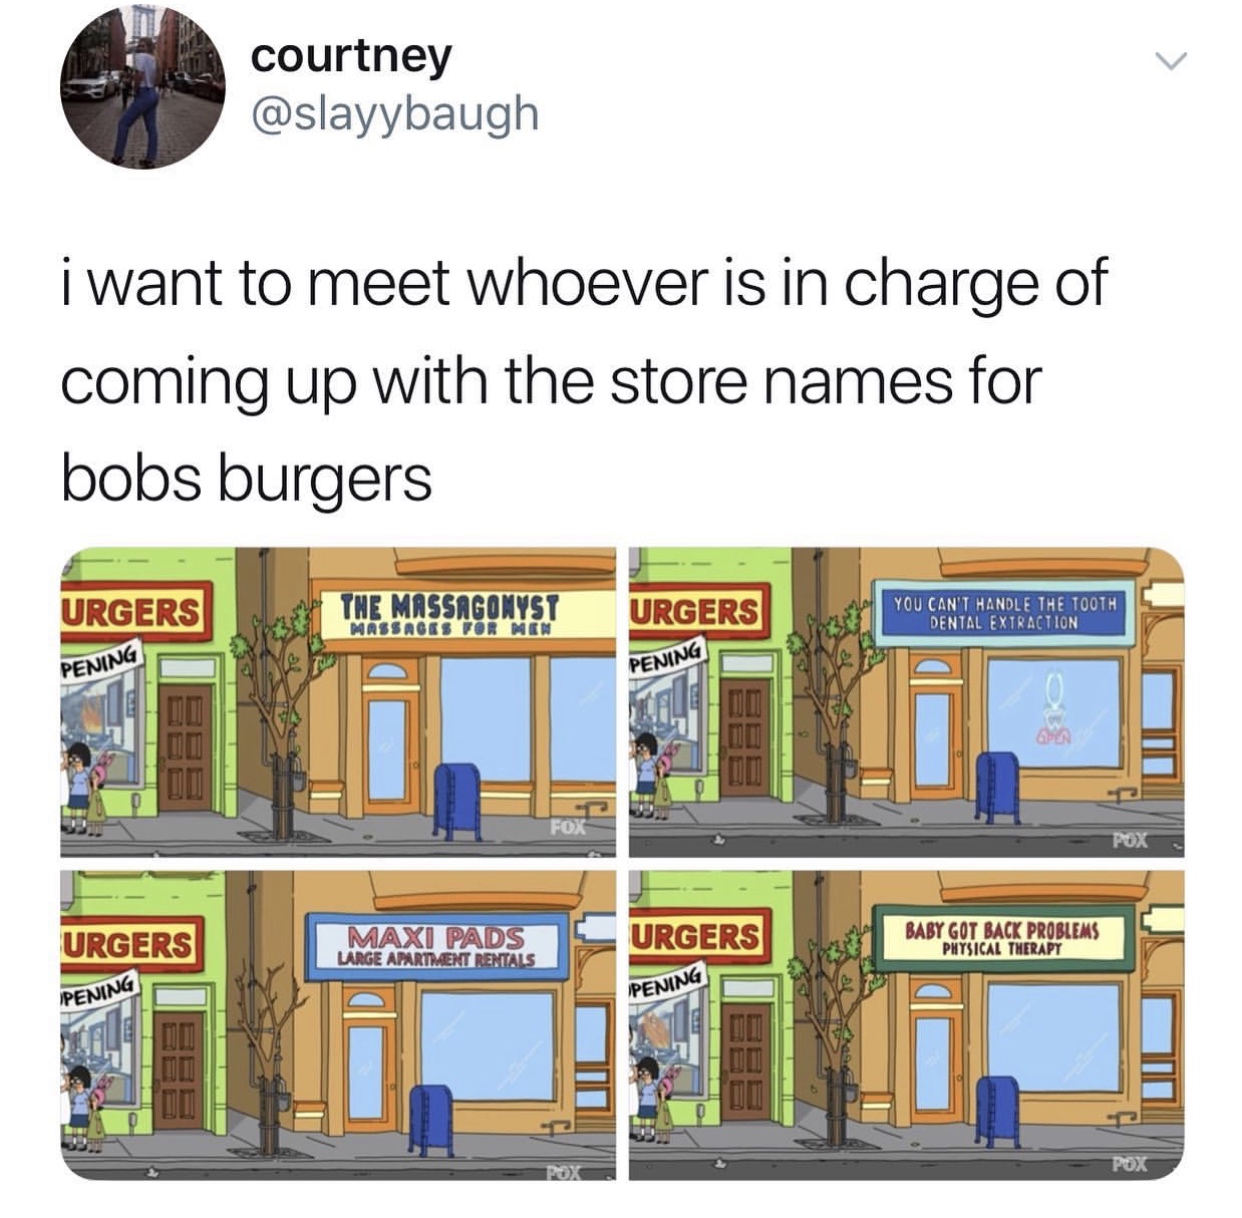 meme of organization - courtney i want to meet whoever is in charge of coming up with the store names for bobs burgers Urgers The Massago Myst Urgers You Can'T Handle The Tooth Dental Extraction Pening Pening Urgers Maxi Pads Large Apartment Rentals Urger